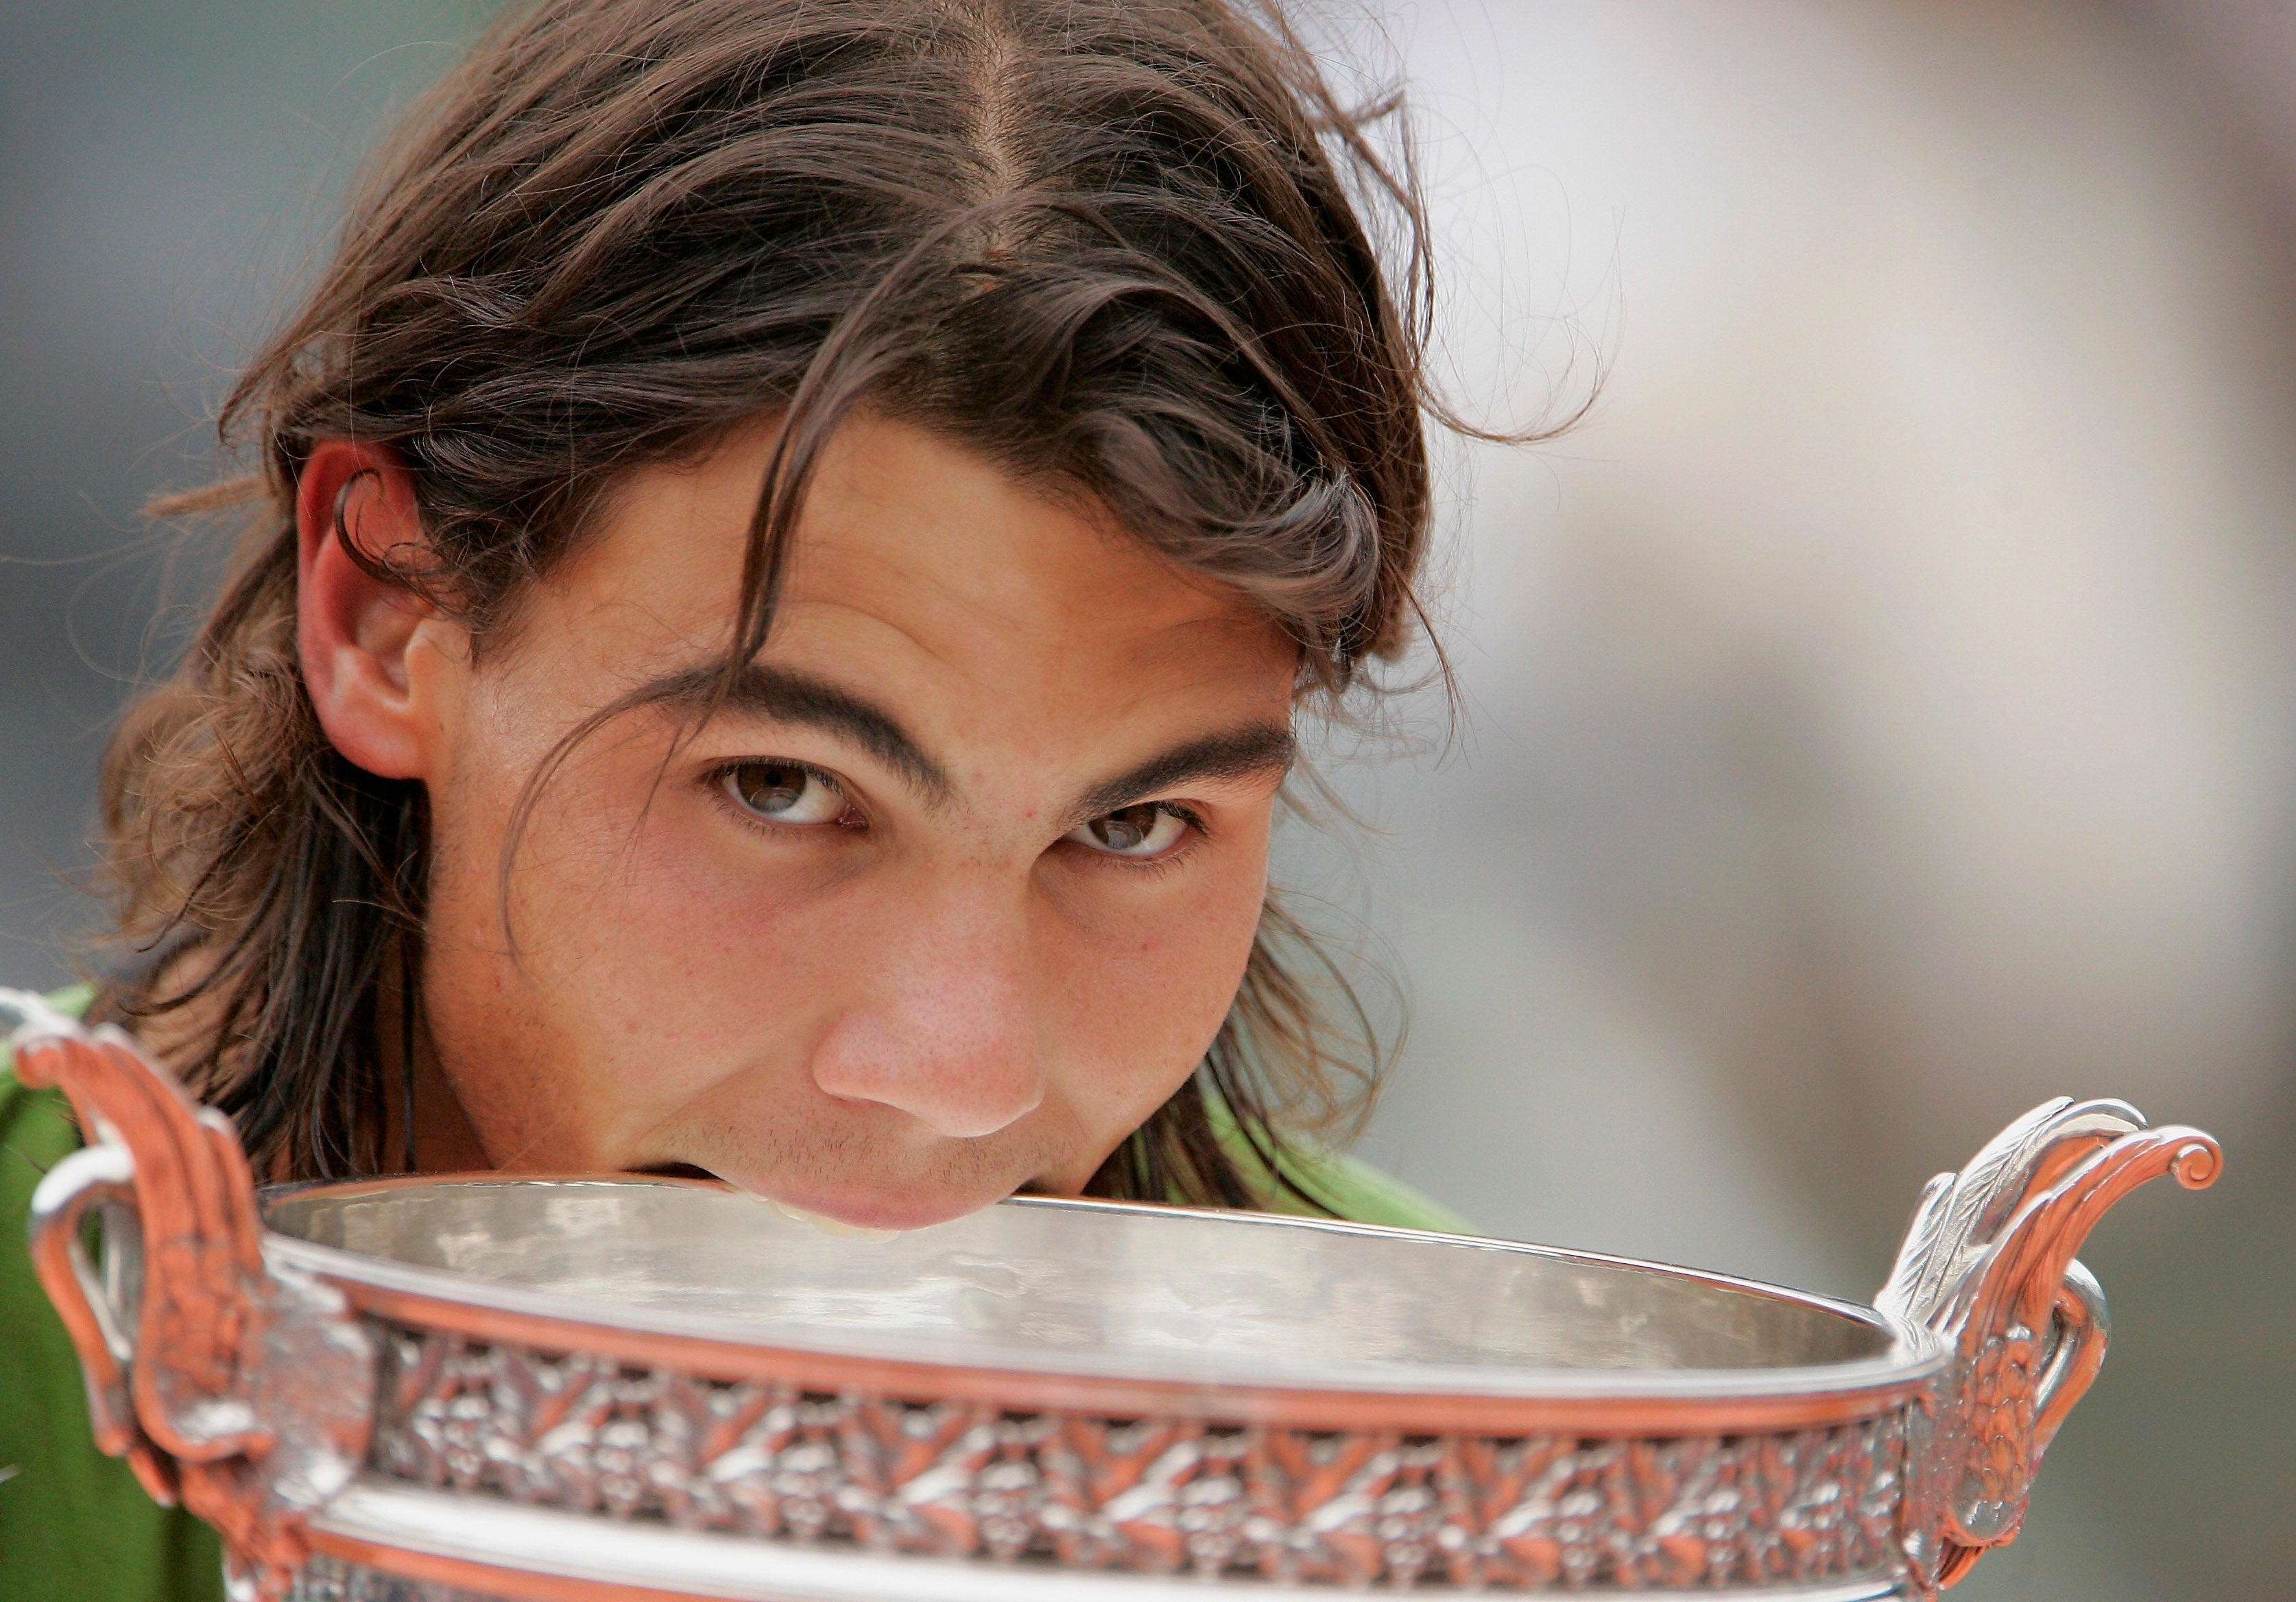 There is a 17-year gap between Nadal’s first and last French Open titles